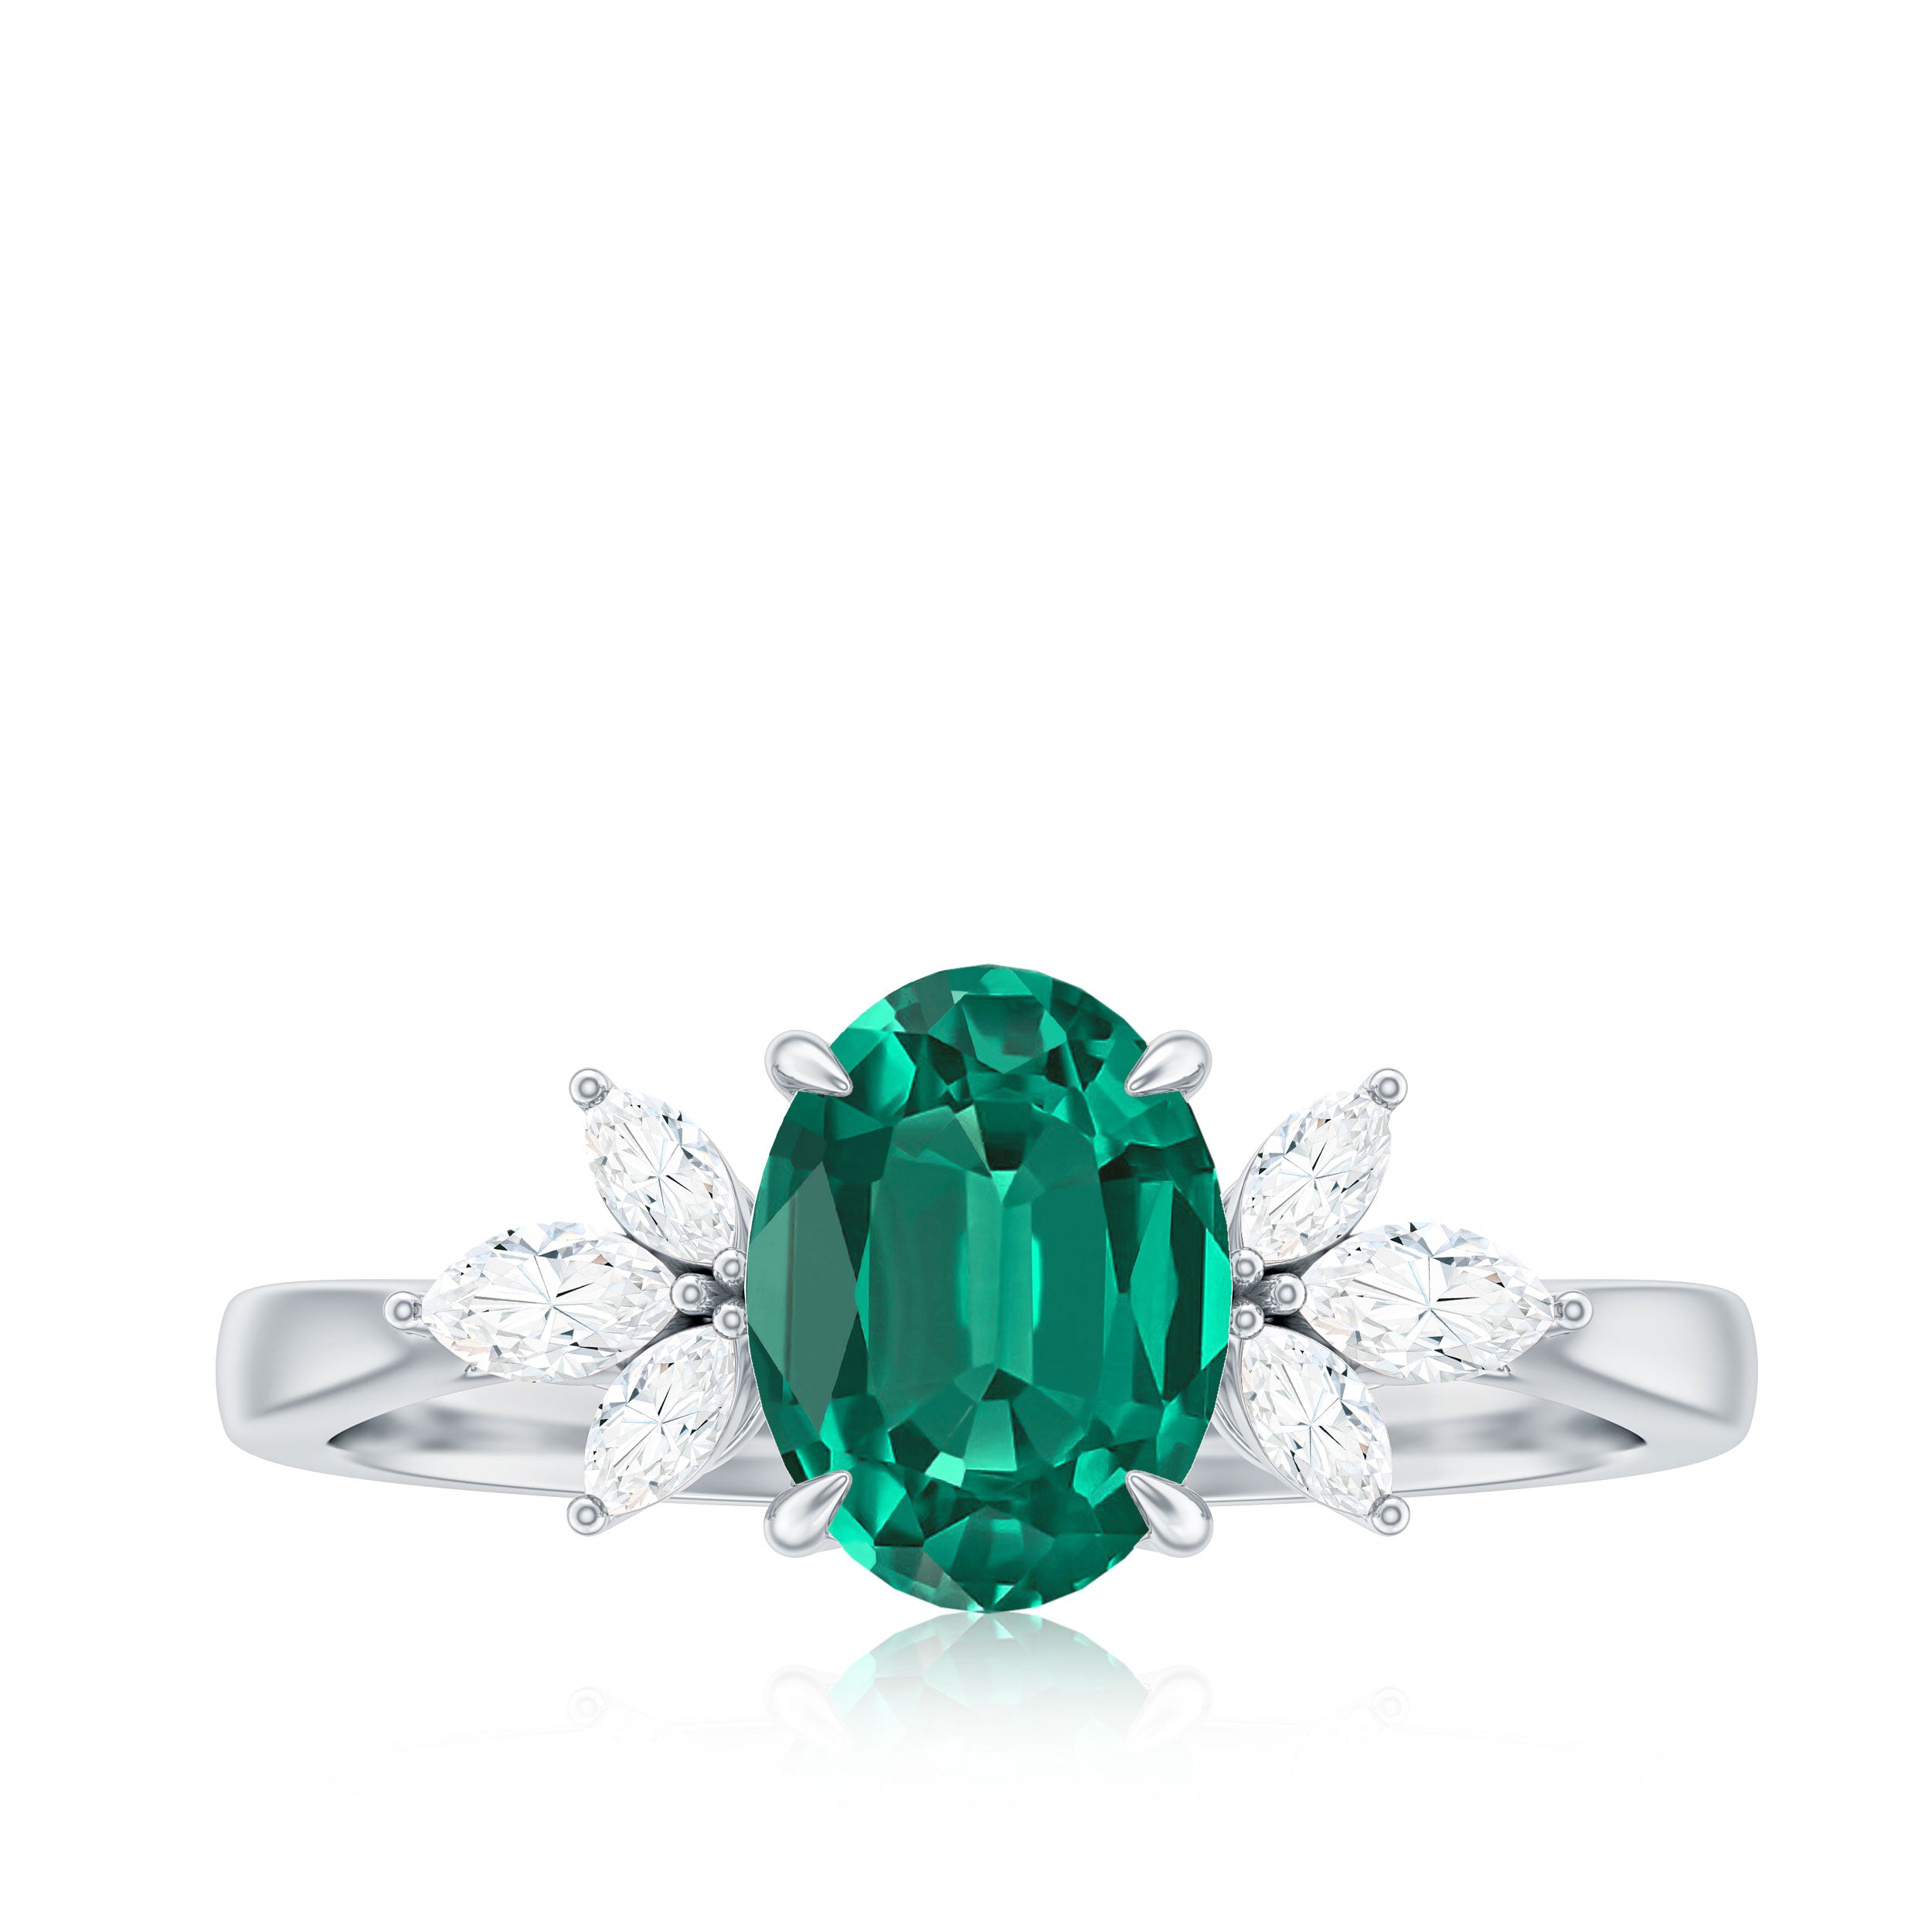 1.75 CT Oval Created Emerald Designer Engagement Ring with Diamond Lab Created Emerald - ( AAAA ) - Quality - Rosec Jewels